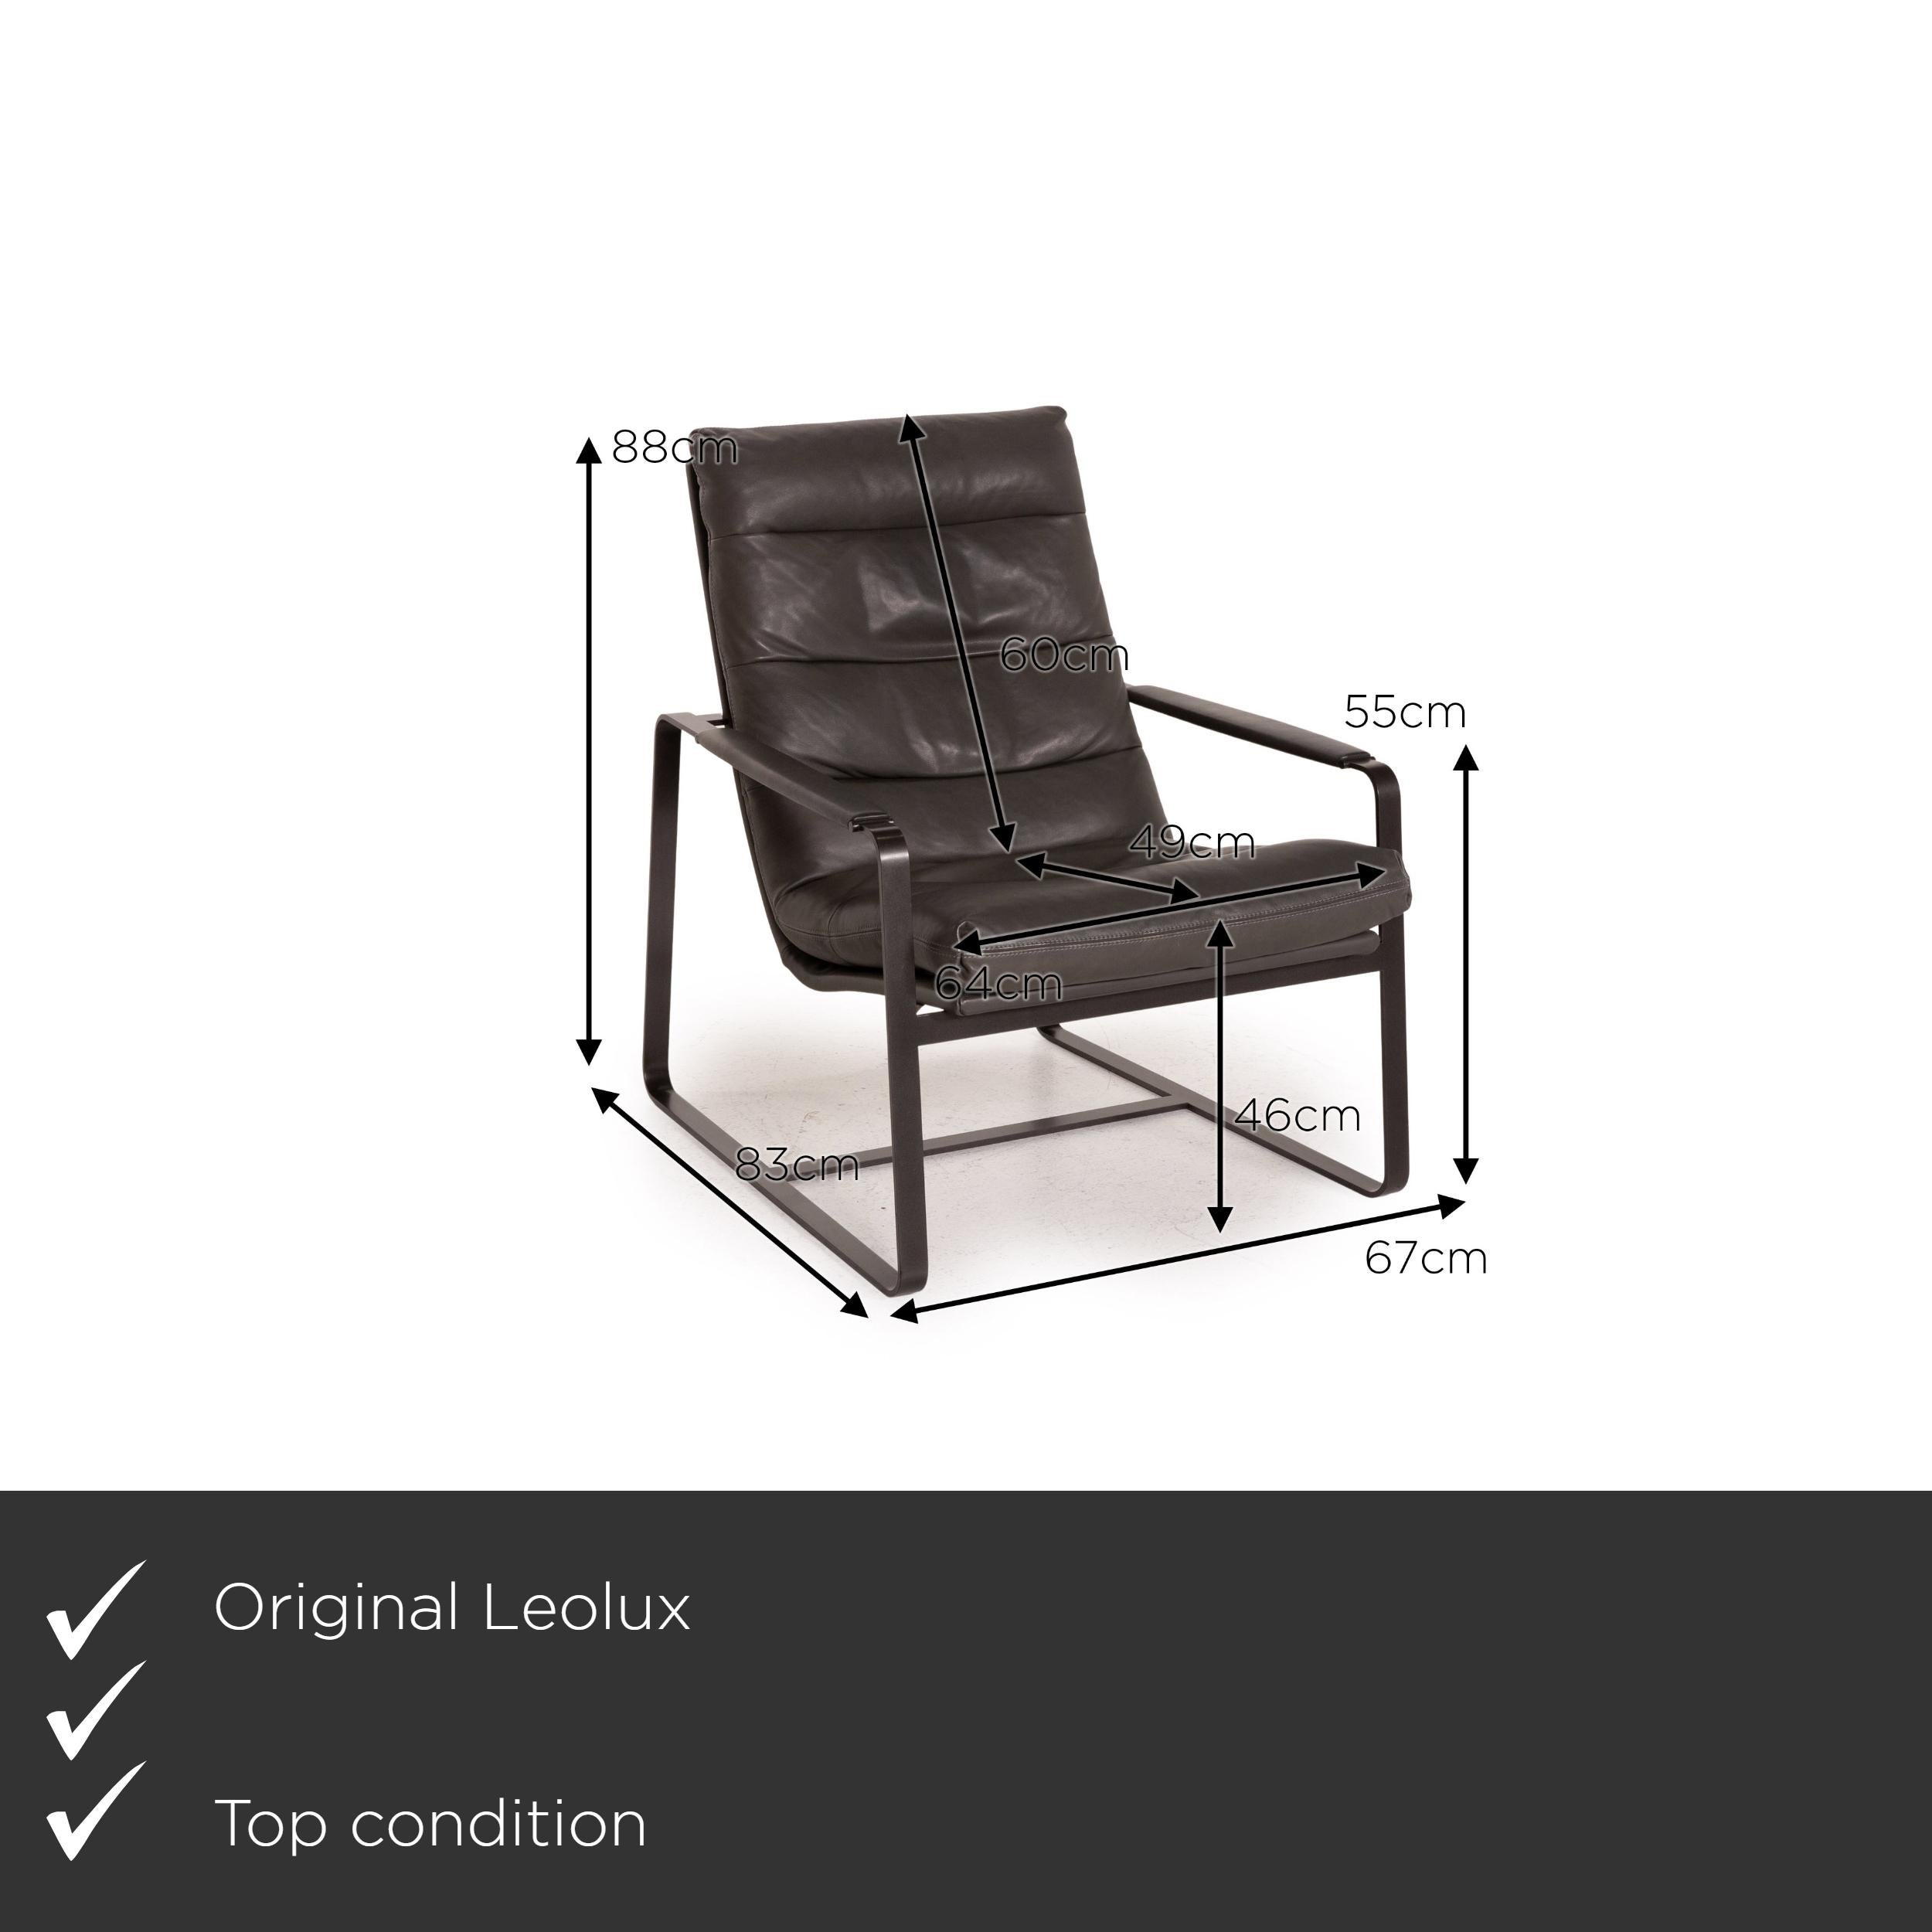 We present to you a Leolux Indra leather armchair gray.

Product measurements in centimeters:

Depth 83
Width 67
Height 88
Seat height 46
Rest height 55
Seat depth 49
Seat width 64
Back height 60.
 
 
   